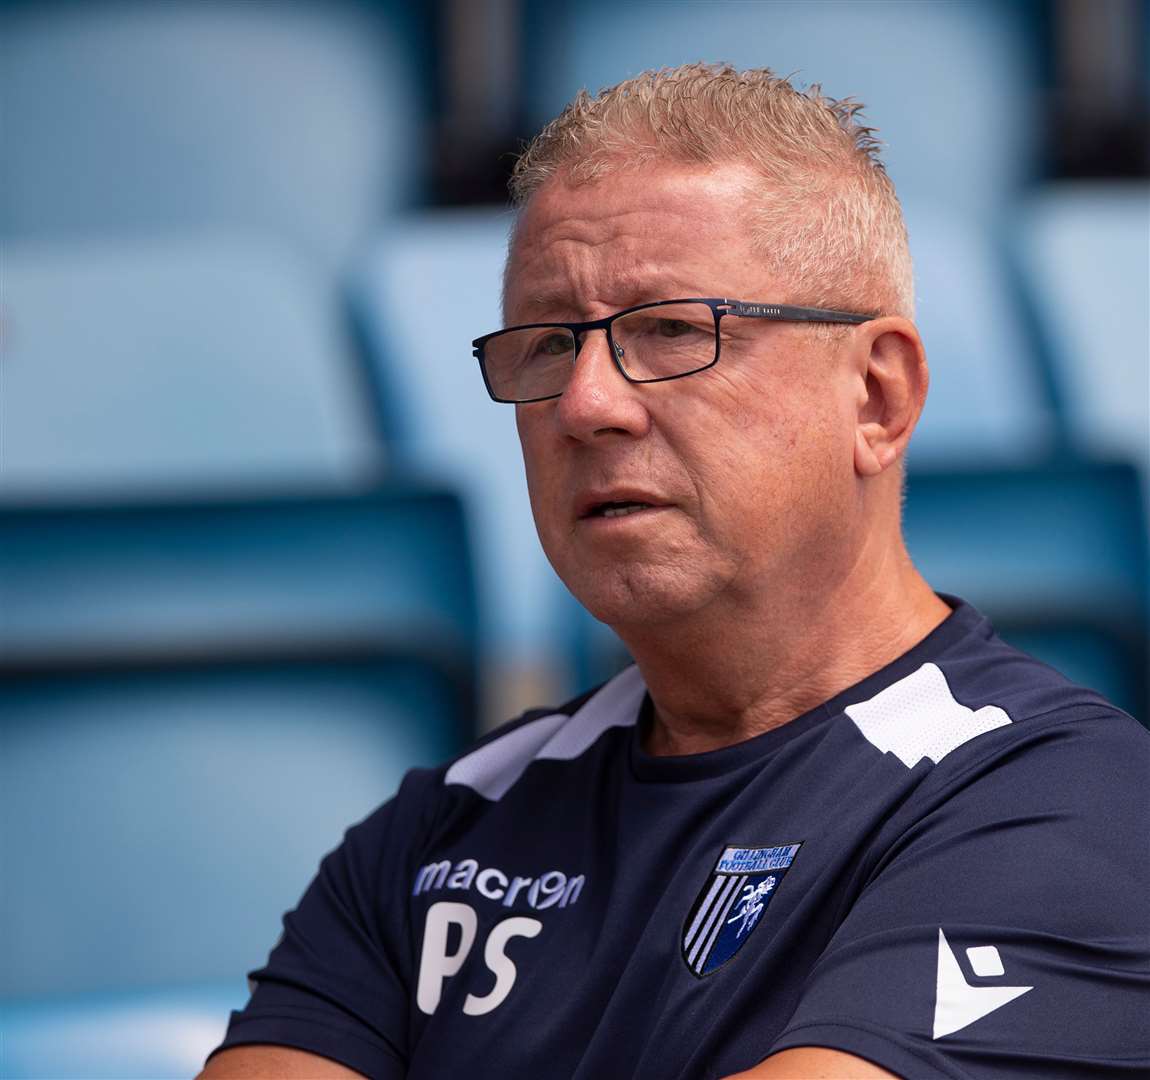 Gillingham chairman Paul Scally wants finances to filter down to help keep clubs keep afloat during the coronavirus crisis